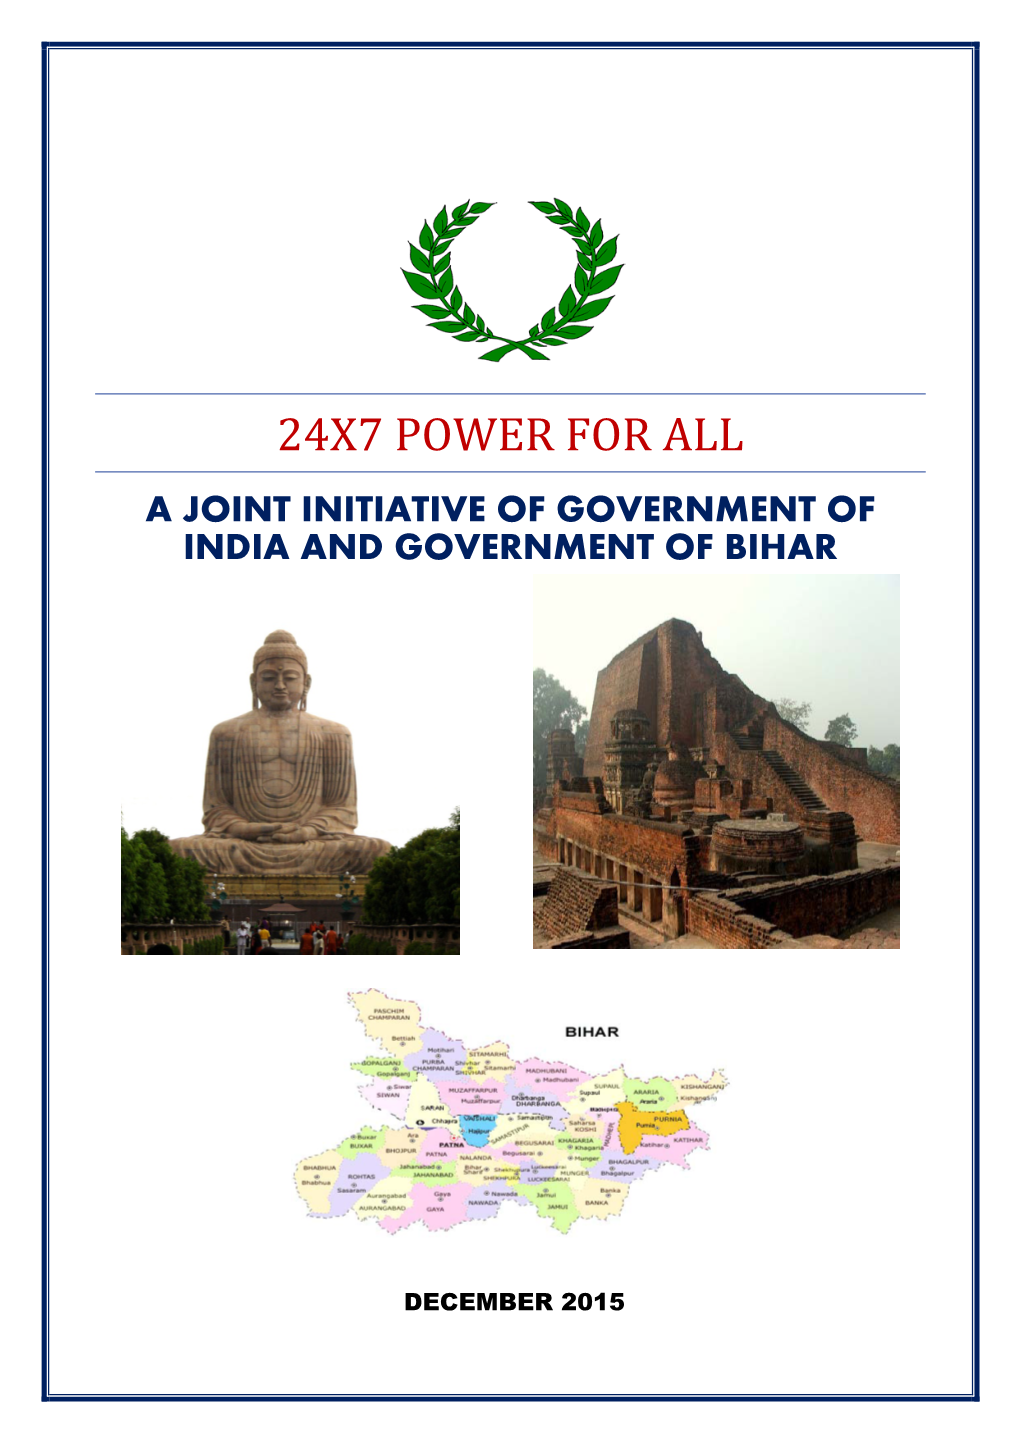 24X7 Power for All a Joint Initiative of Government of India and Government of Bihar